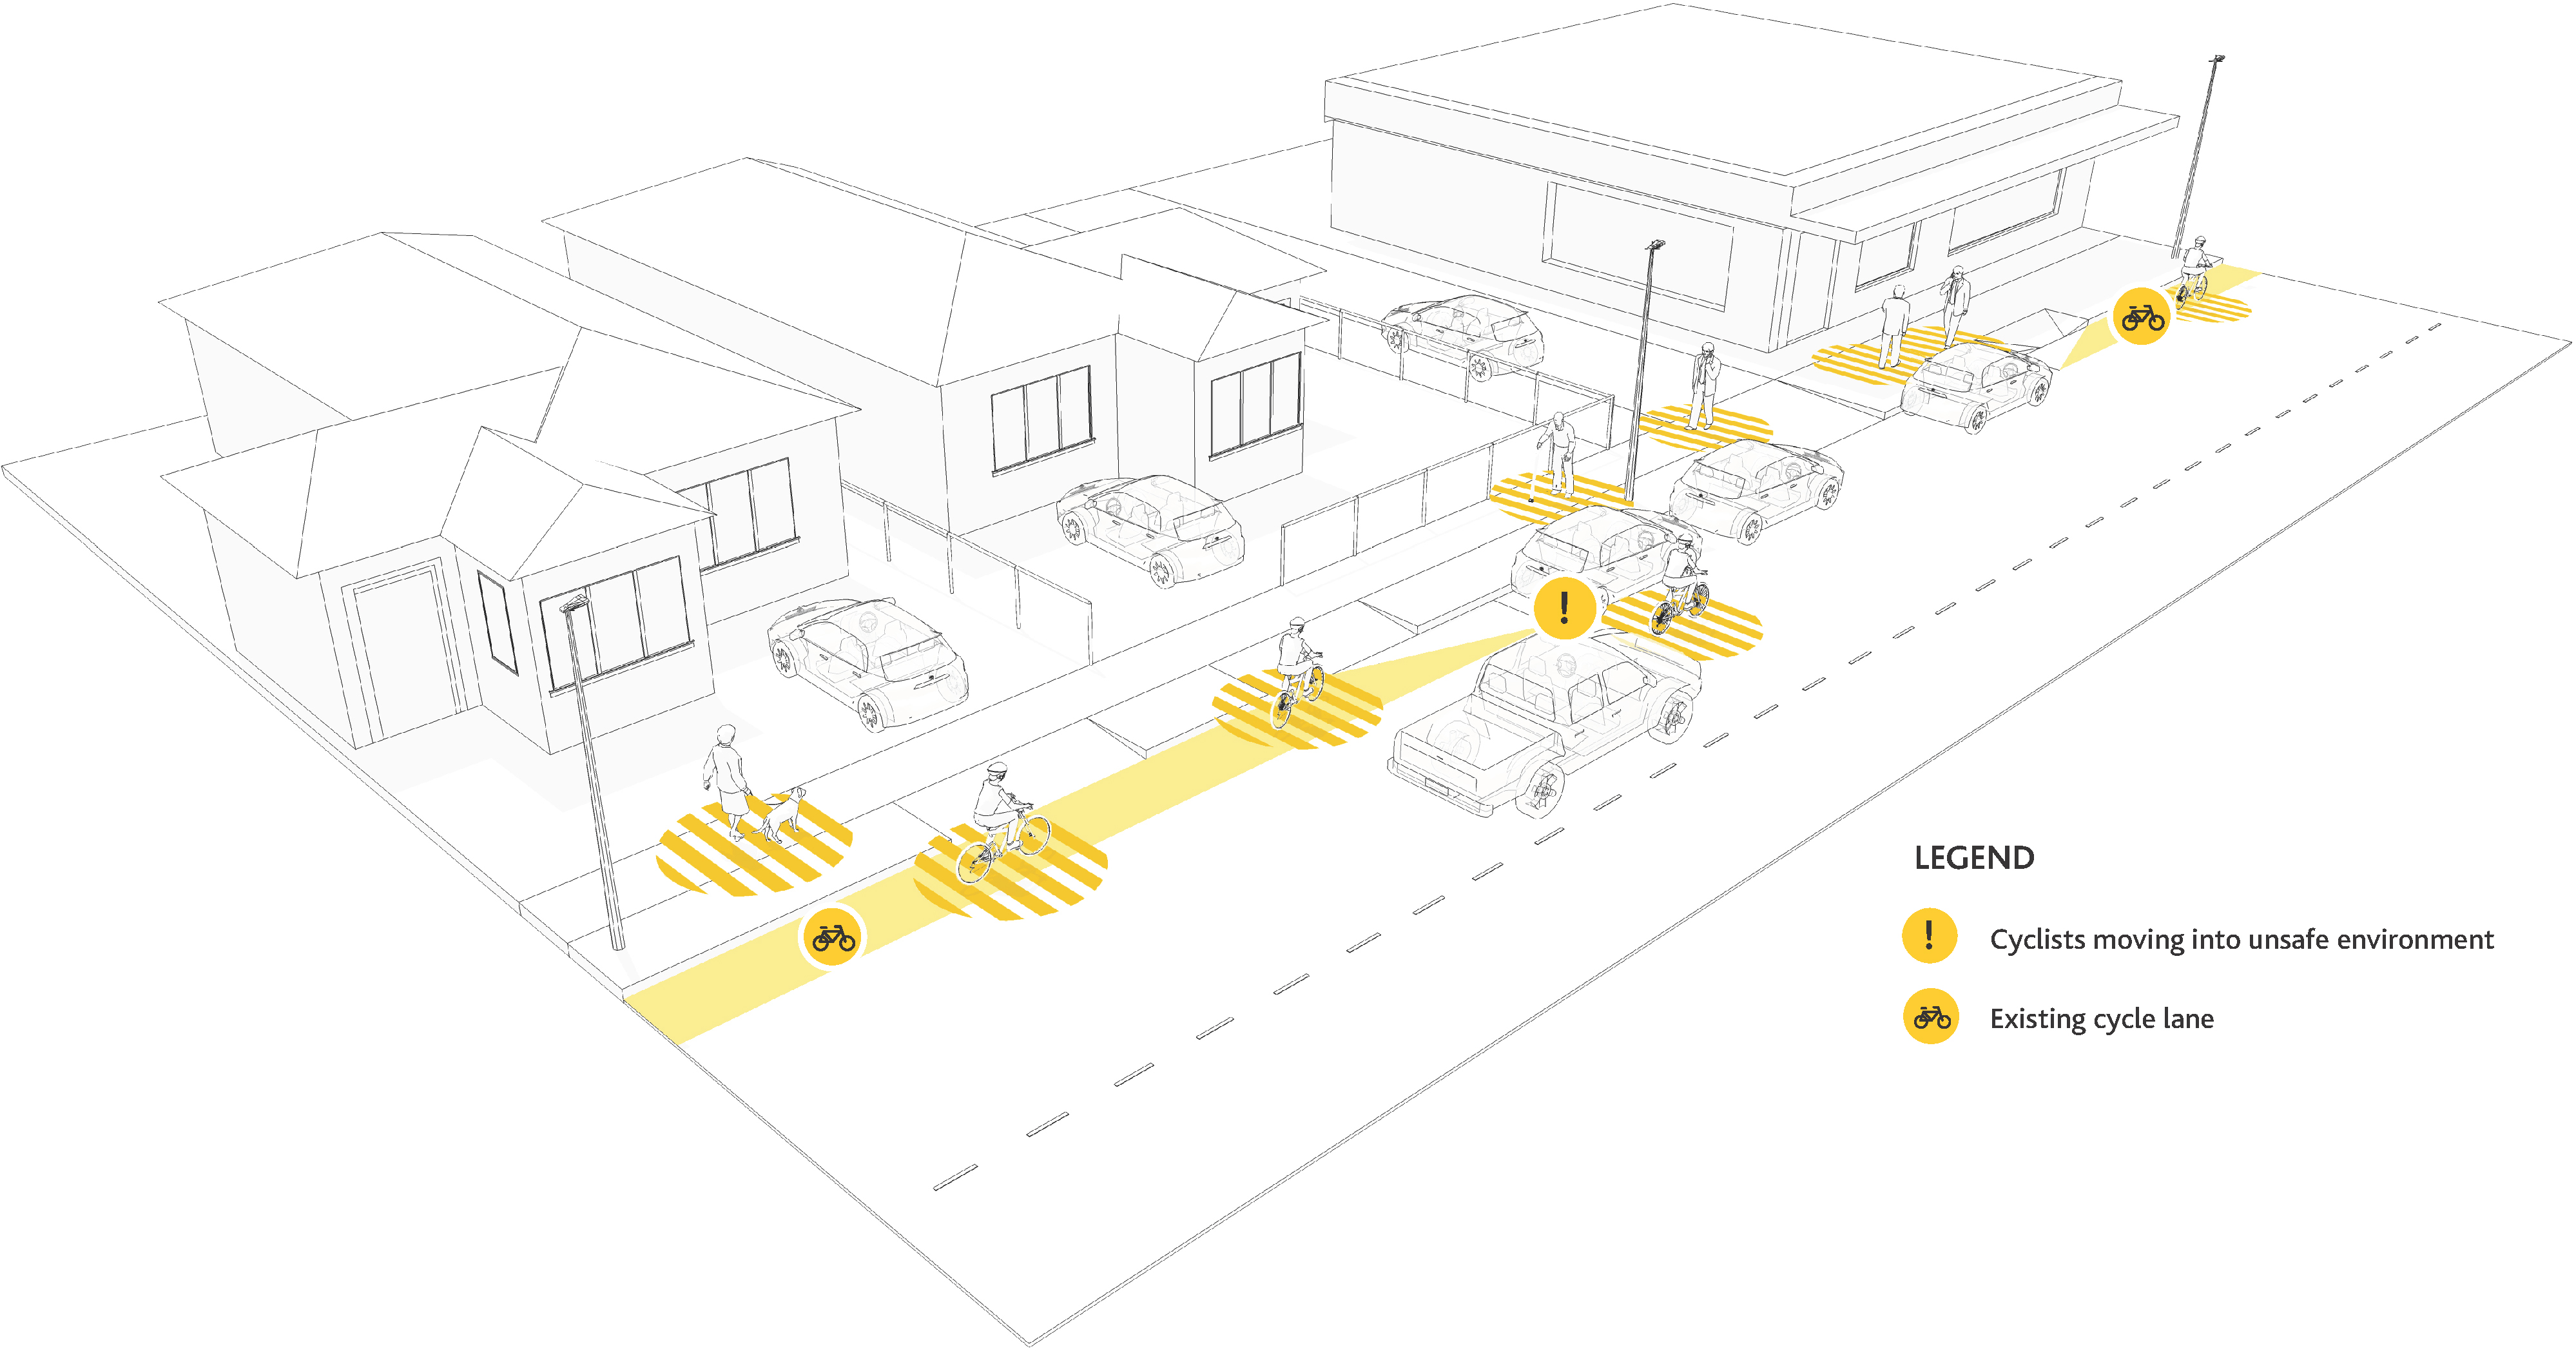 Illustrated image of a disconnected safe cycling corridor